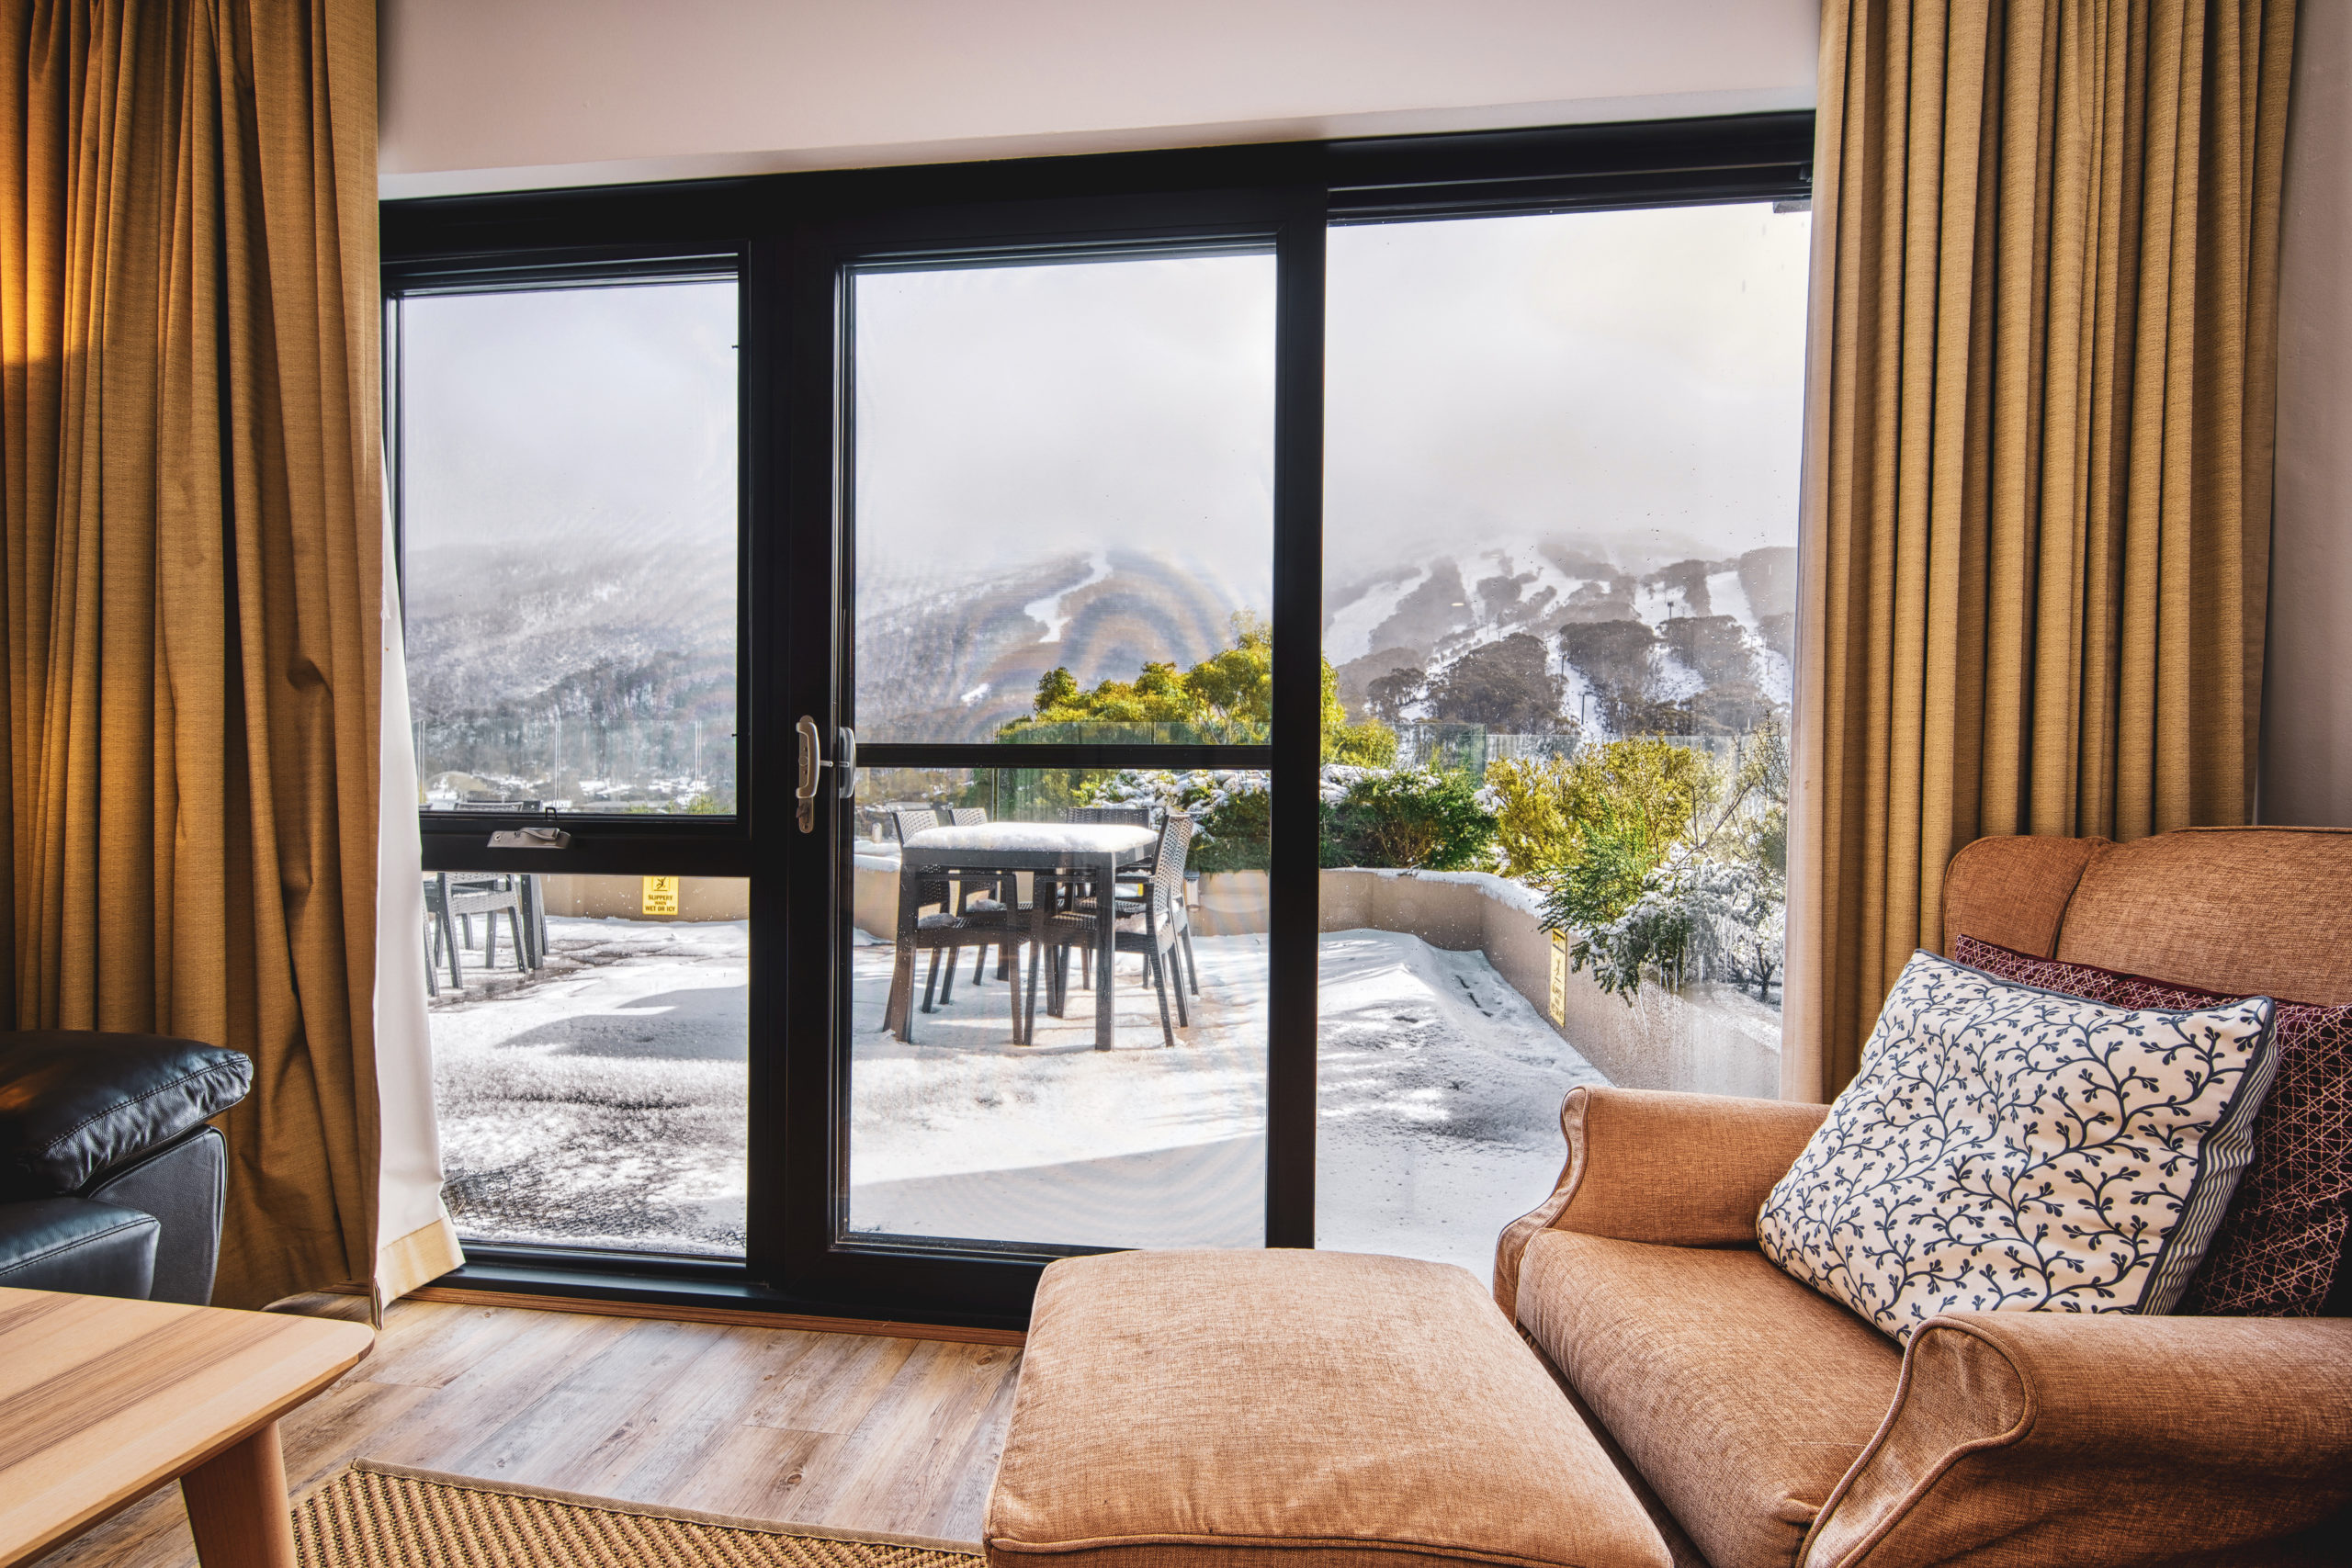 Renovated one bedroom and one bathroom apartment with sweeping mountain views.<br><br>Offers invited over $780,000